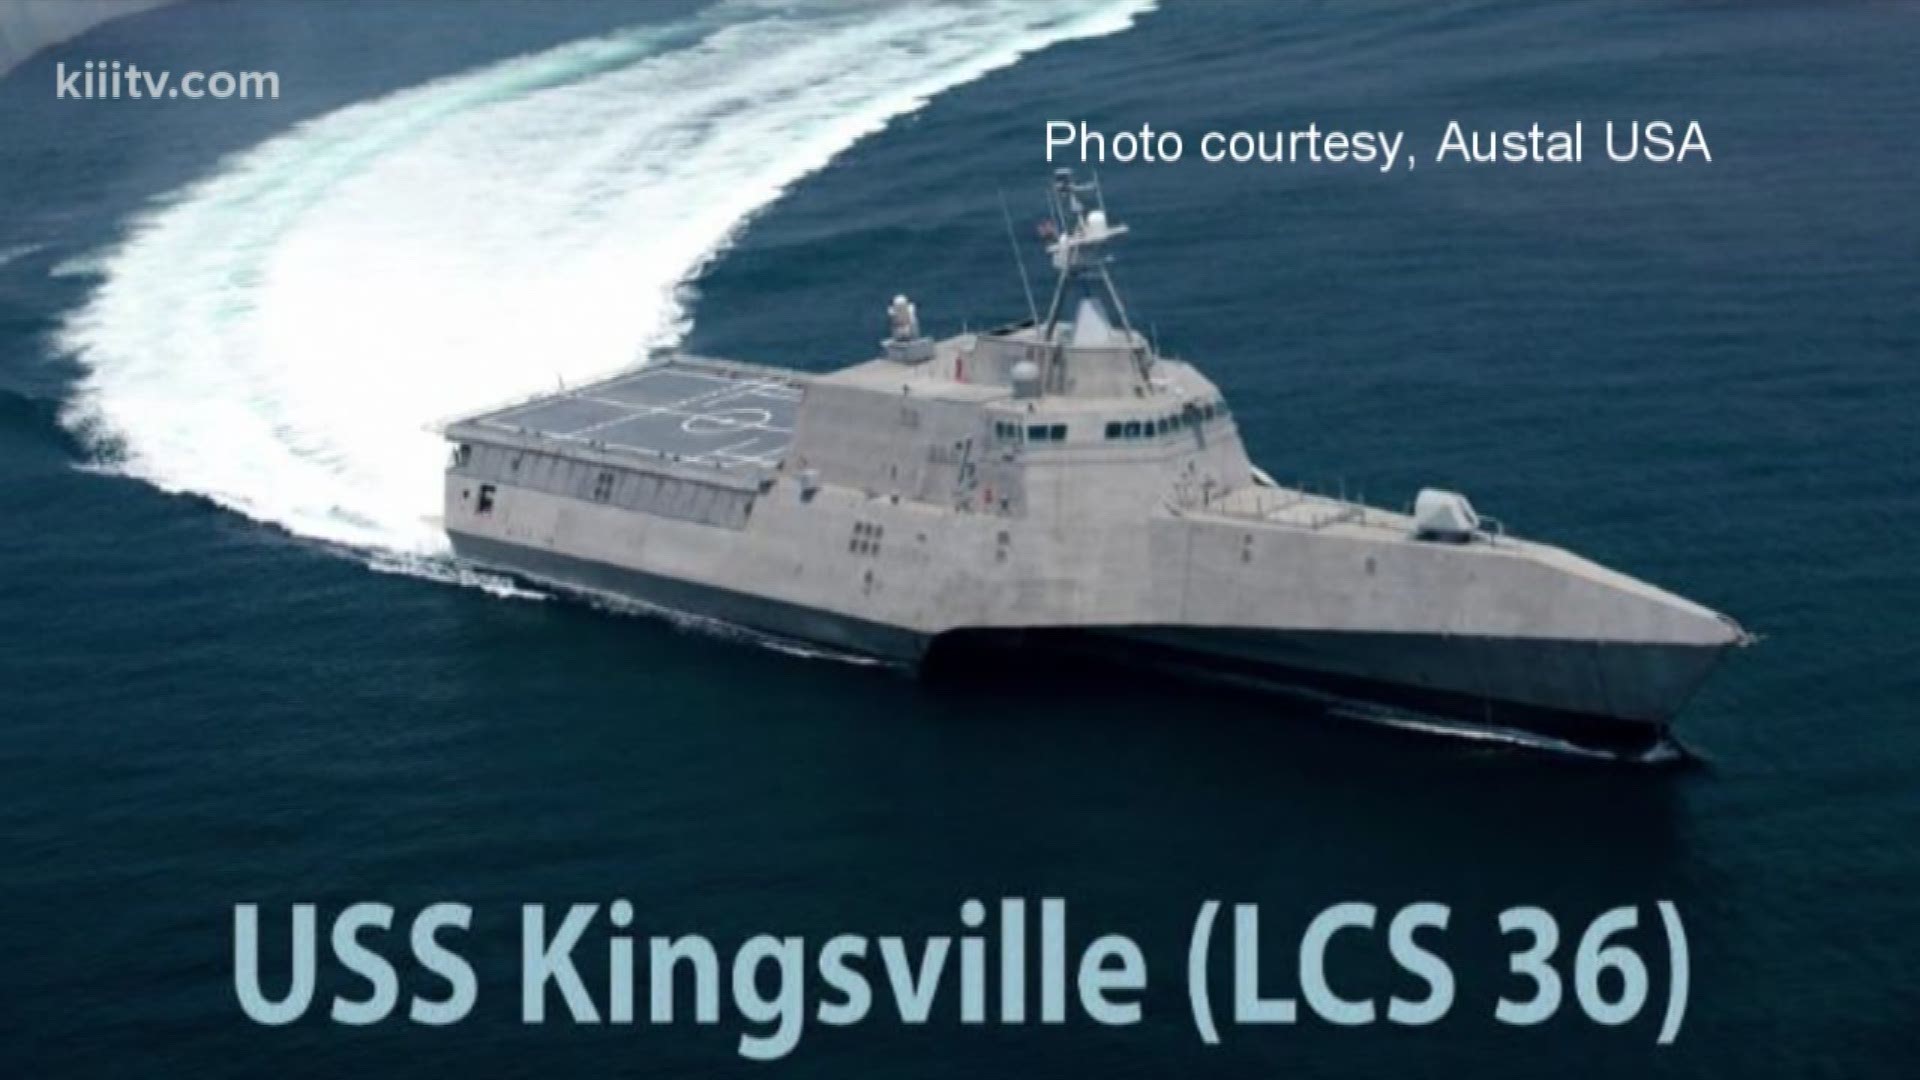 Mayor Sam Fugate announced Thursday that one of the U.S. Navy's upcoming combat ships will be named the USS Kingsville in honor of the South Texas city.